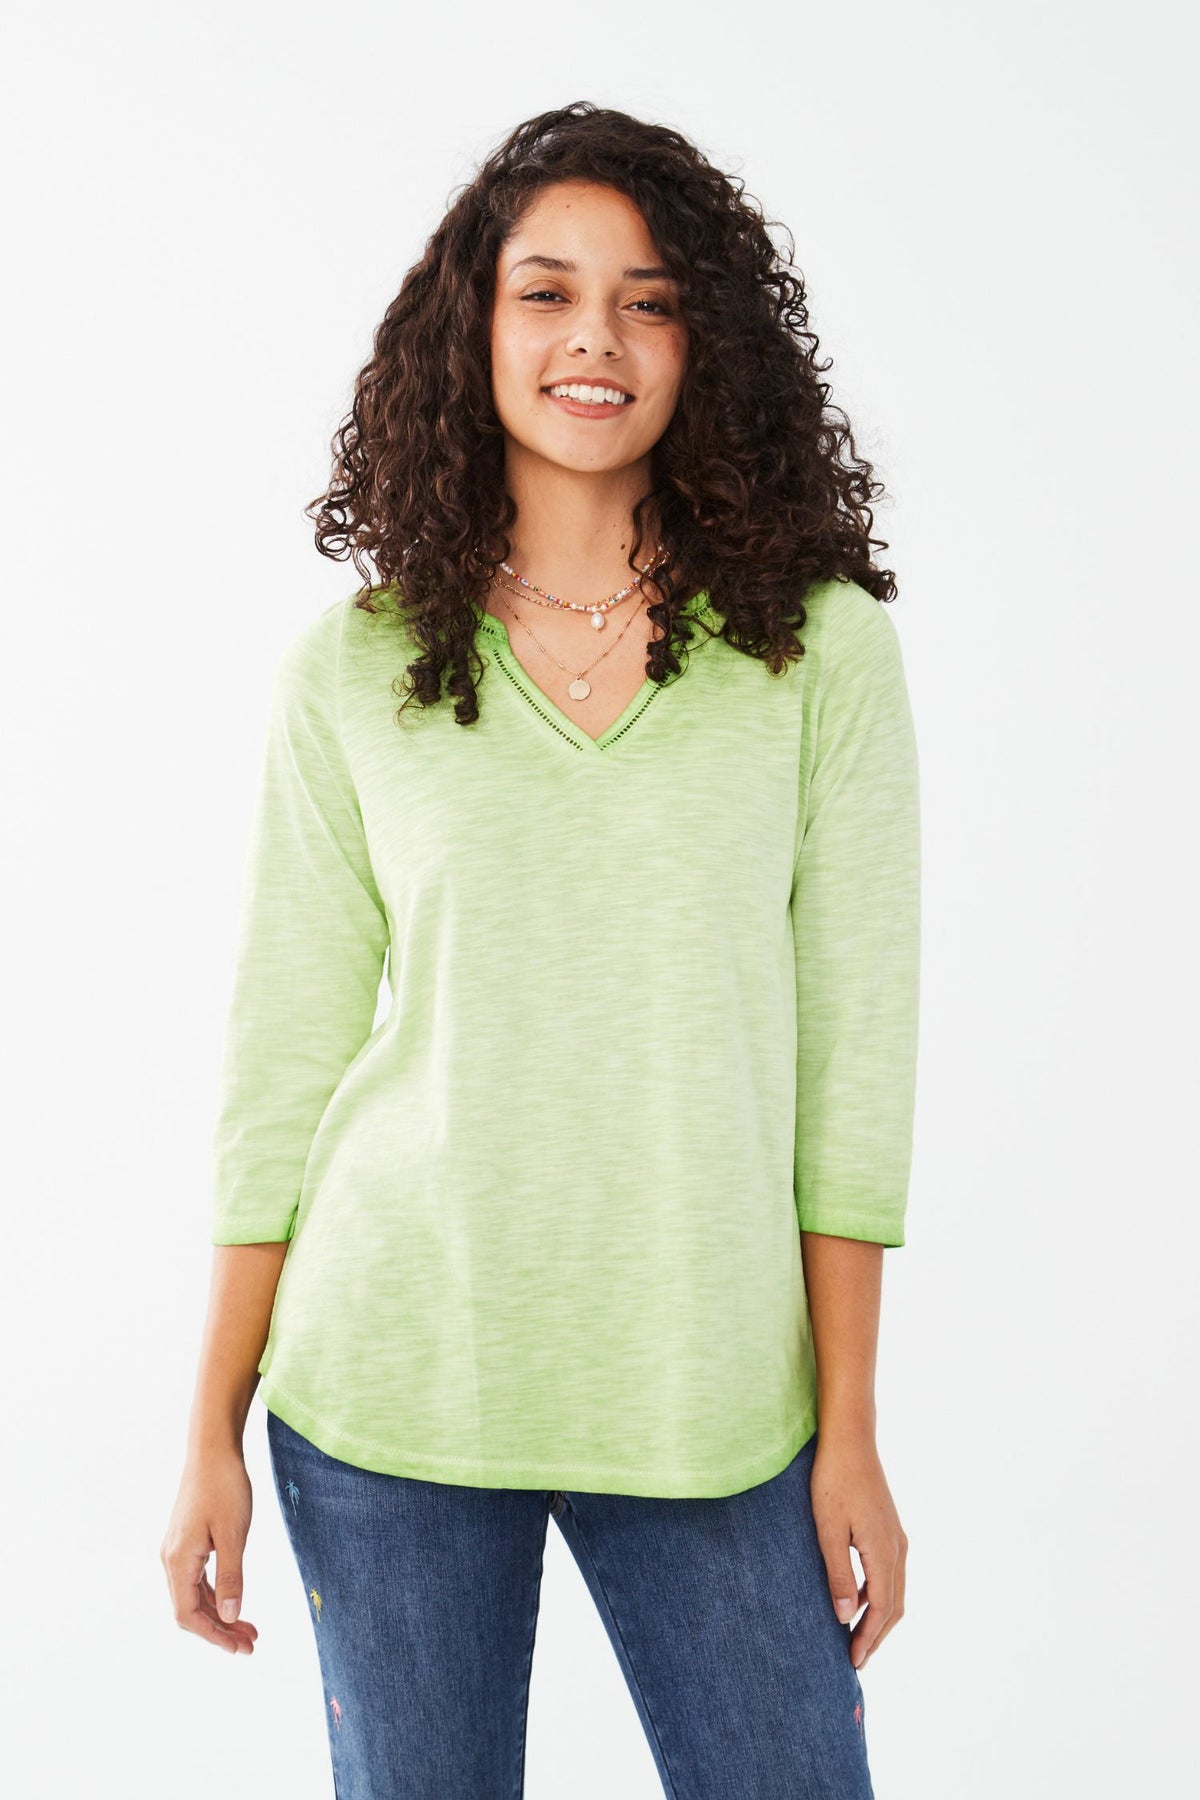 FDJ 3/4 Sleeve Top - Style 3107476, front, green